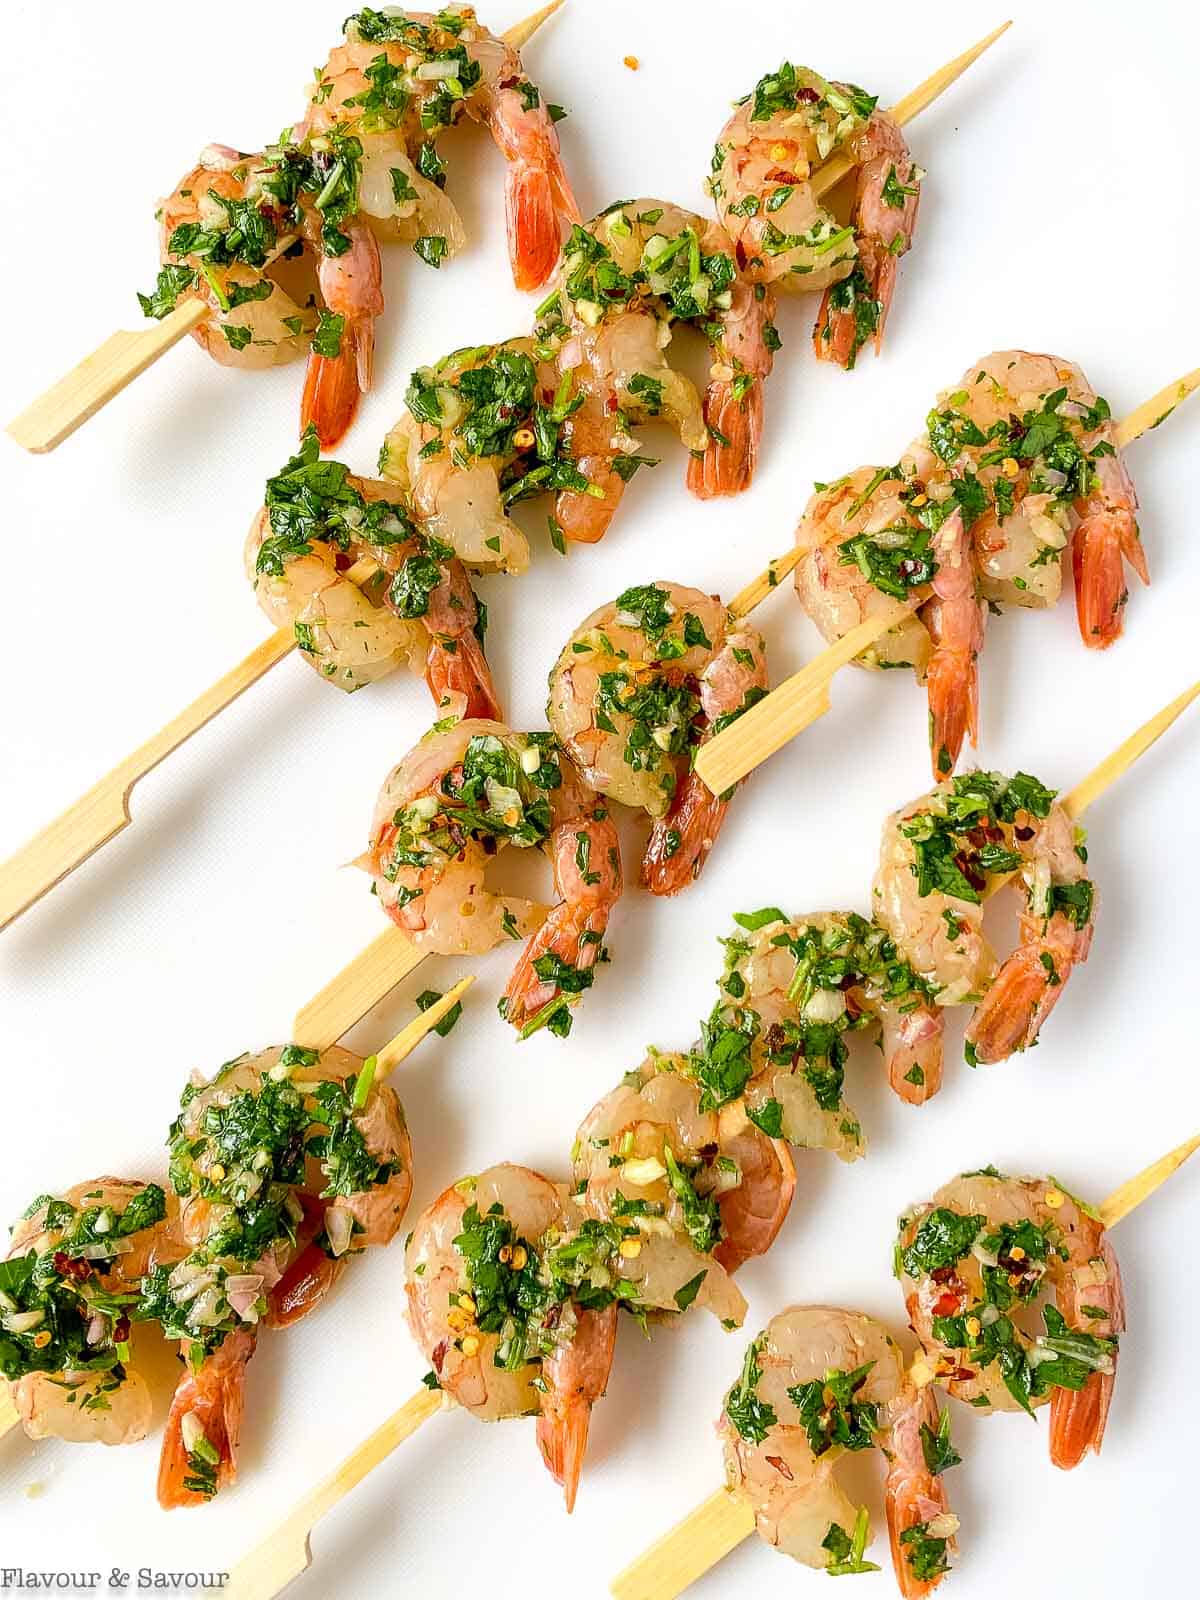 Chimichurri shrimp on skewers ready to grill.